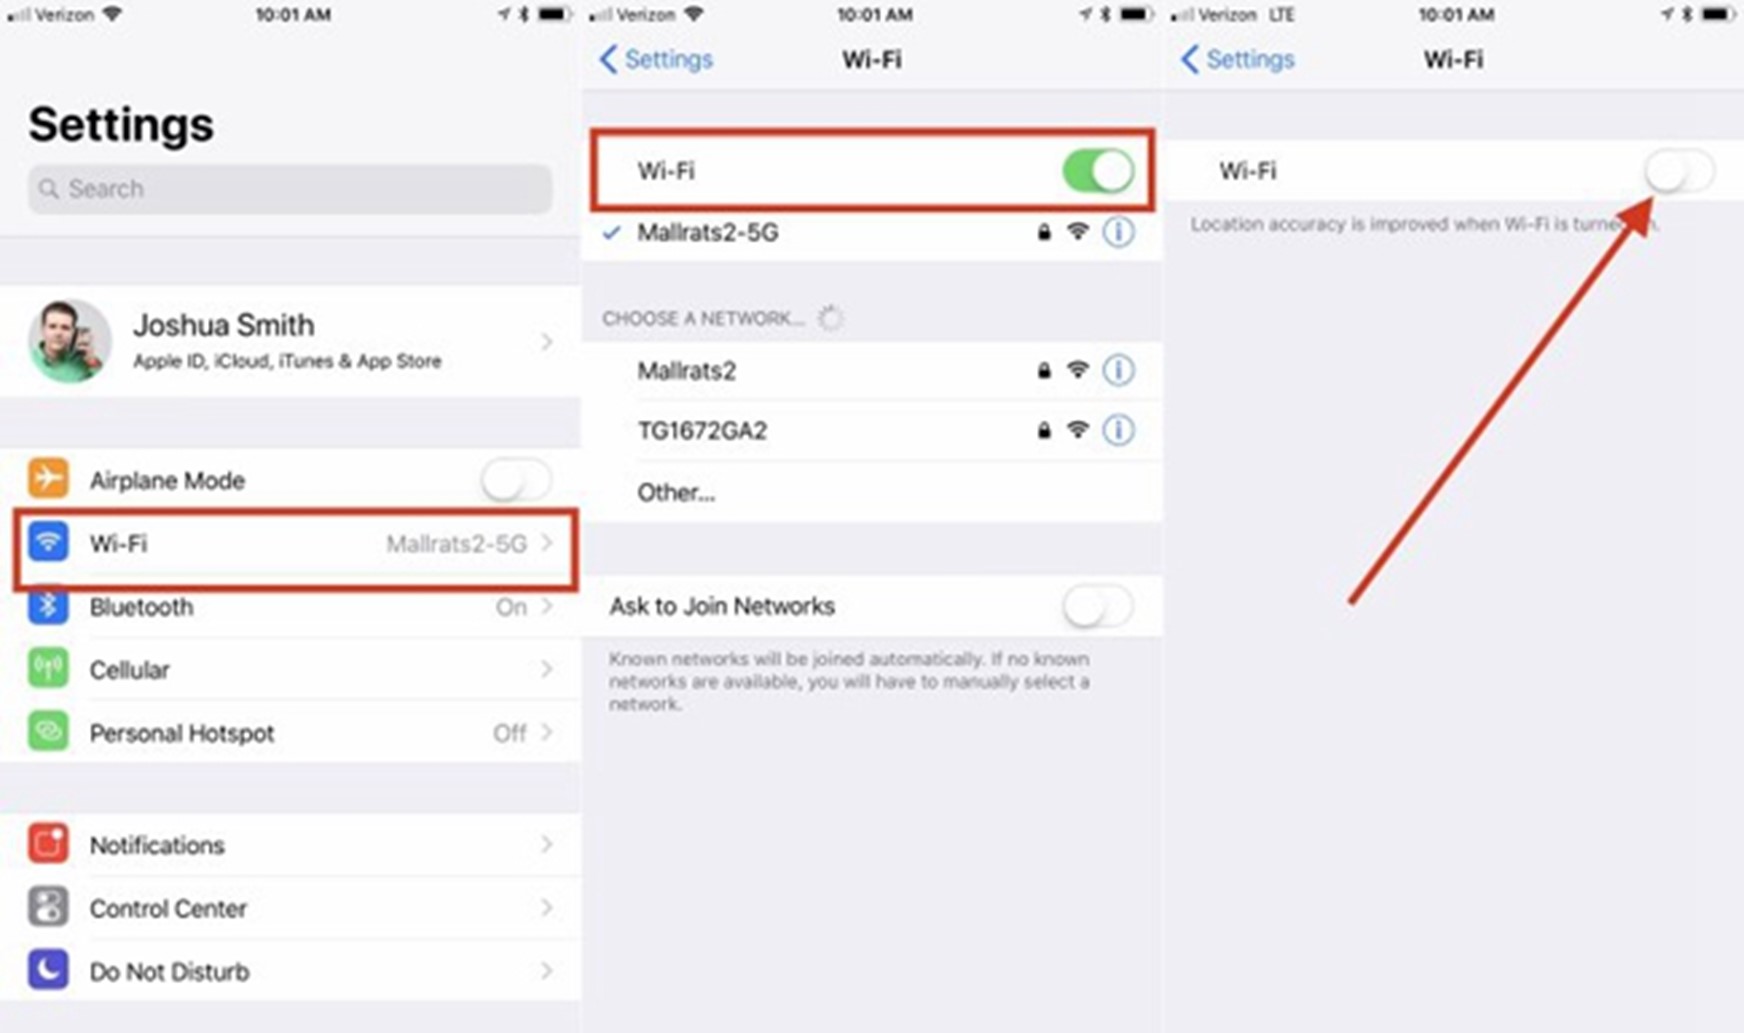 refresh your iPhone’s wifi by turning it off and on